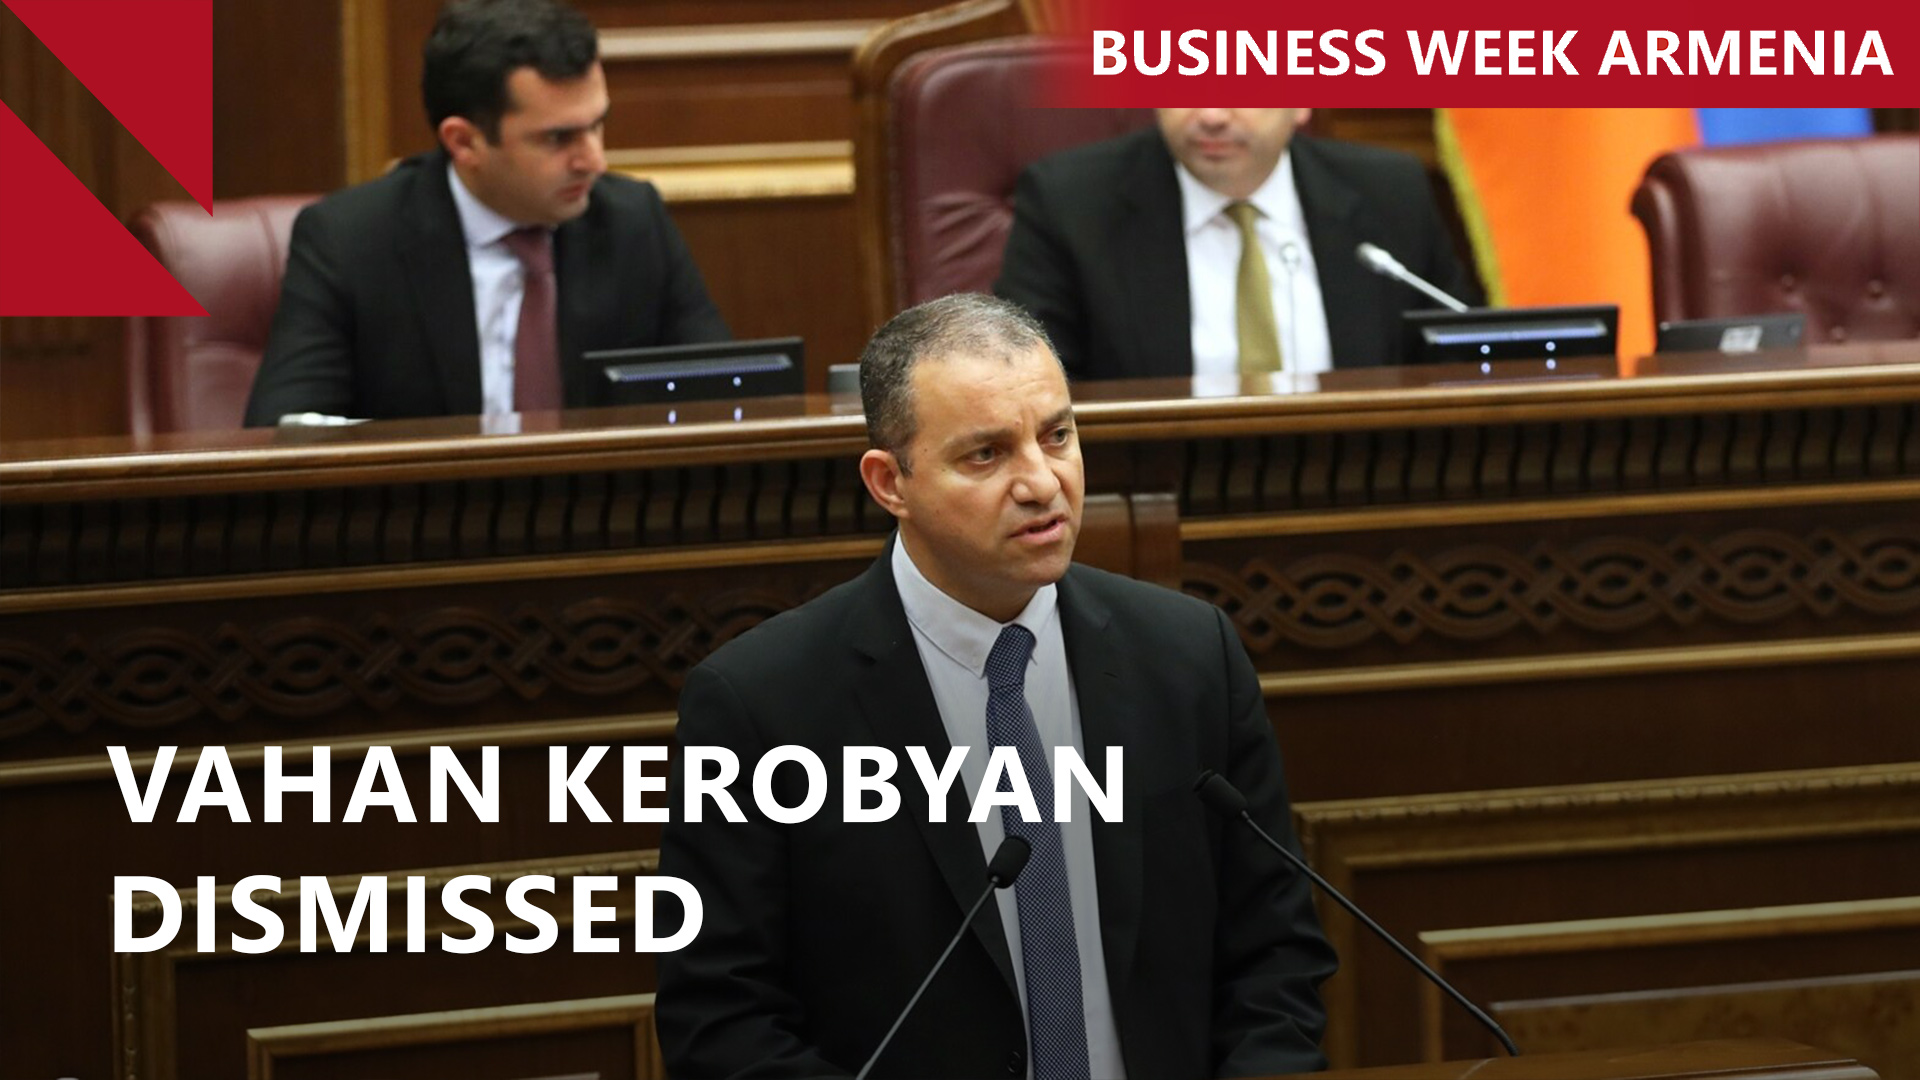 Armenia’s economy minister indicted in corruption probe: THIS WEEK IN BUSINESS